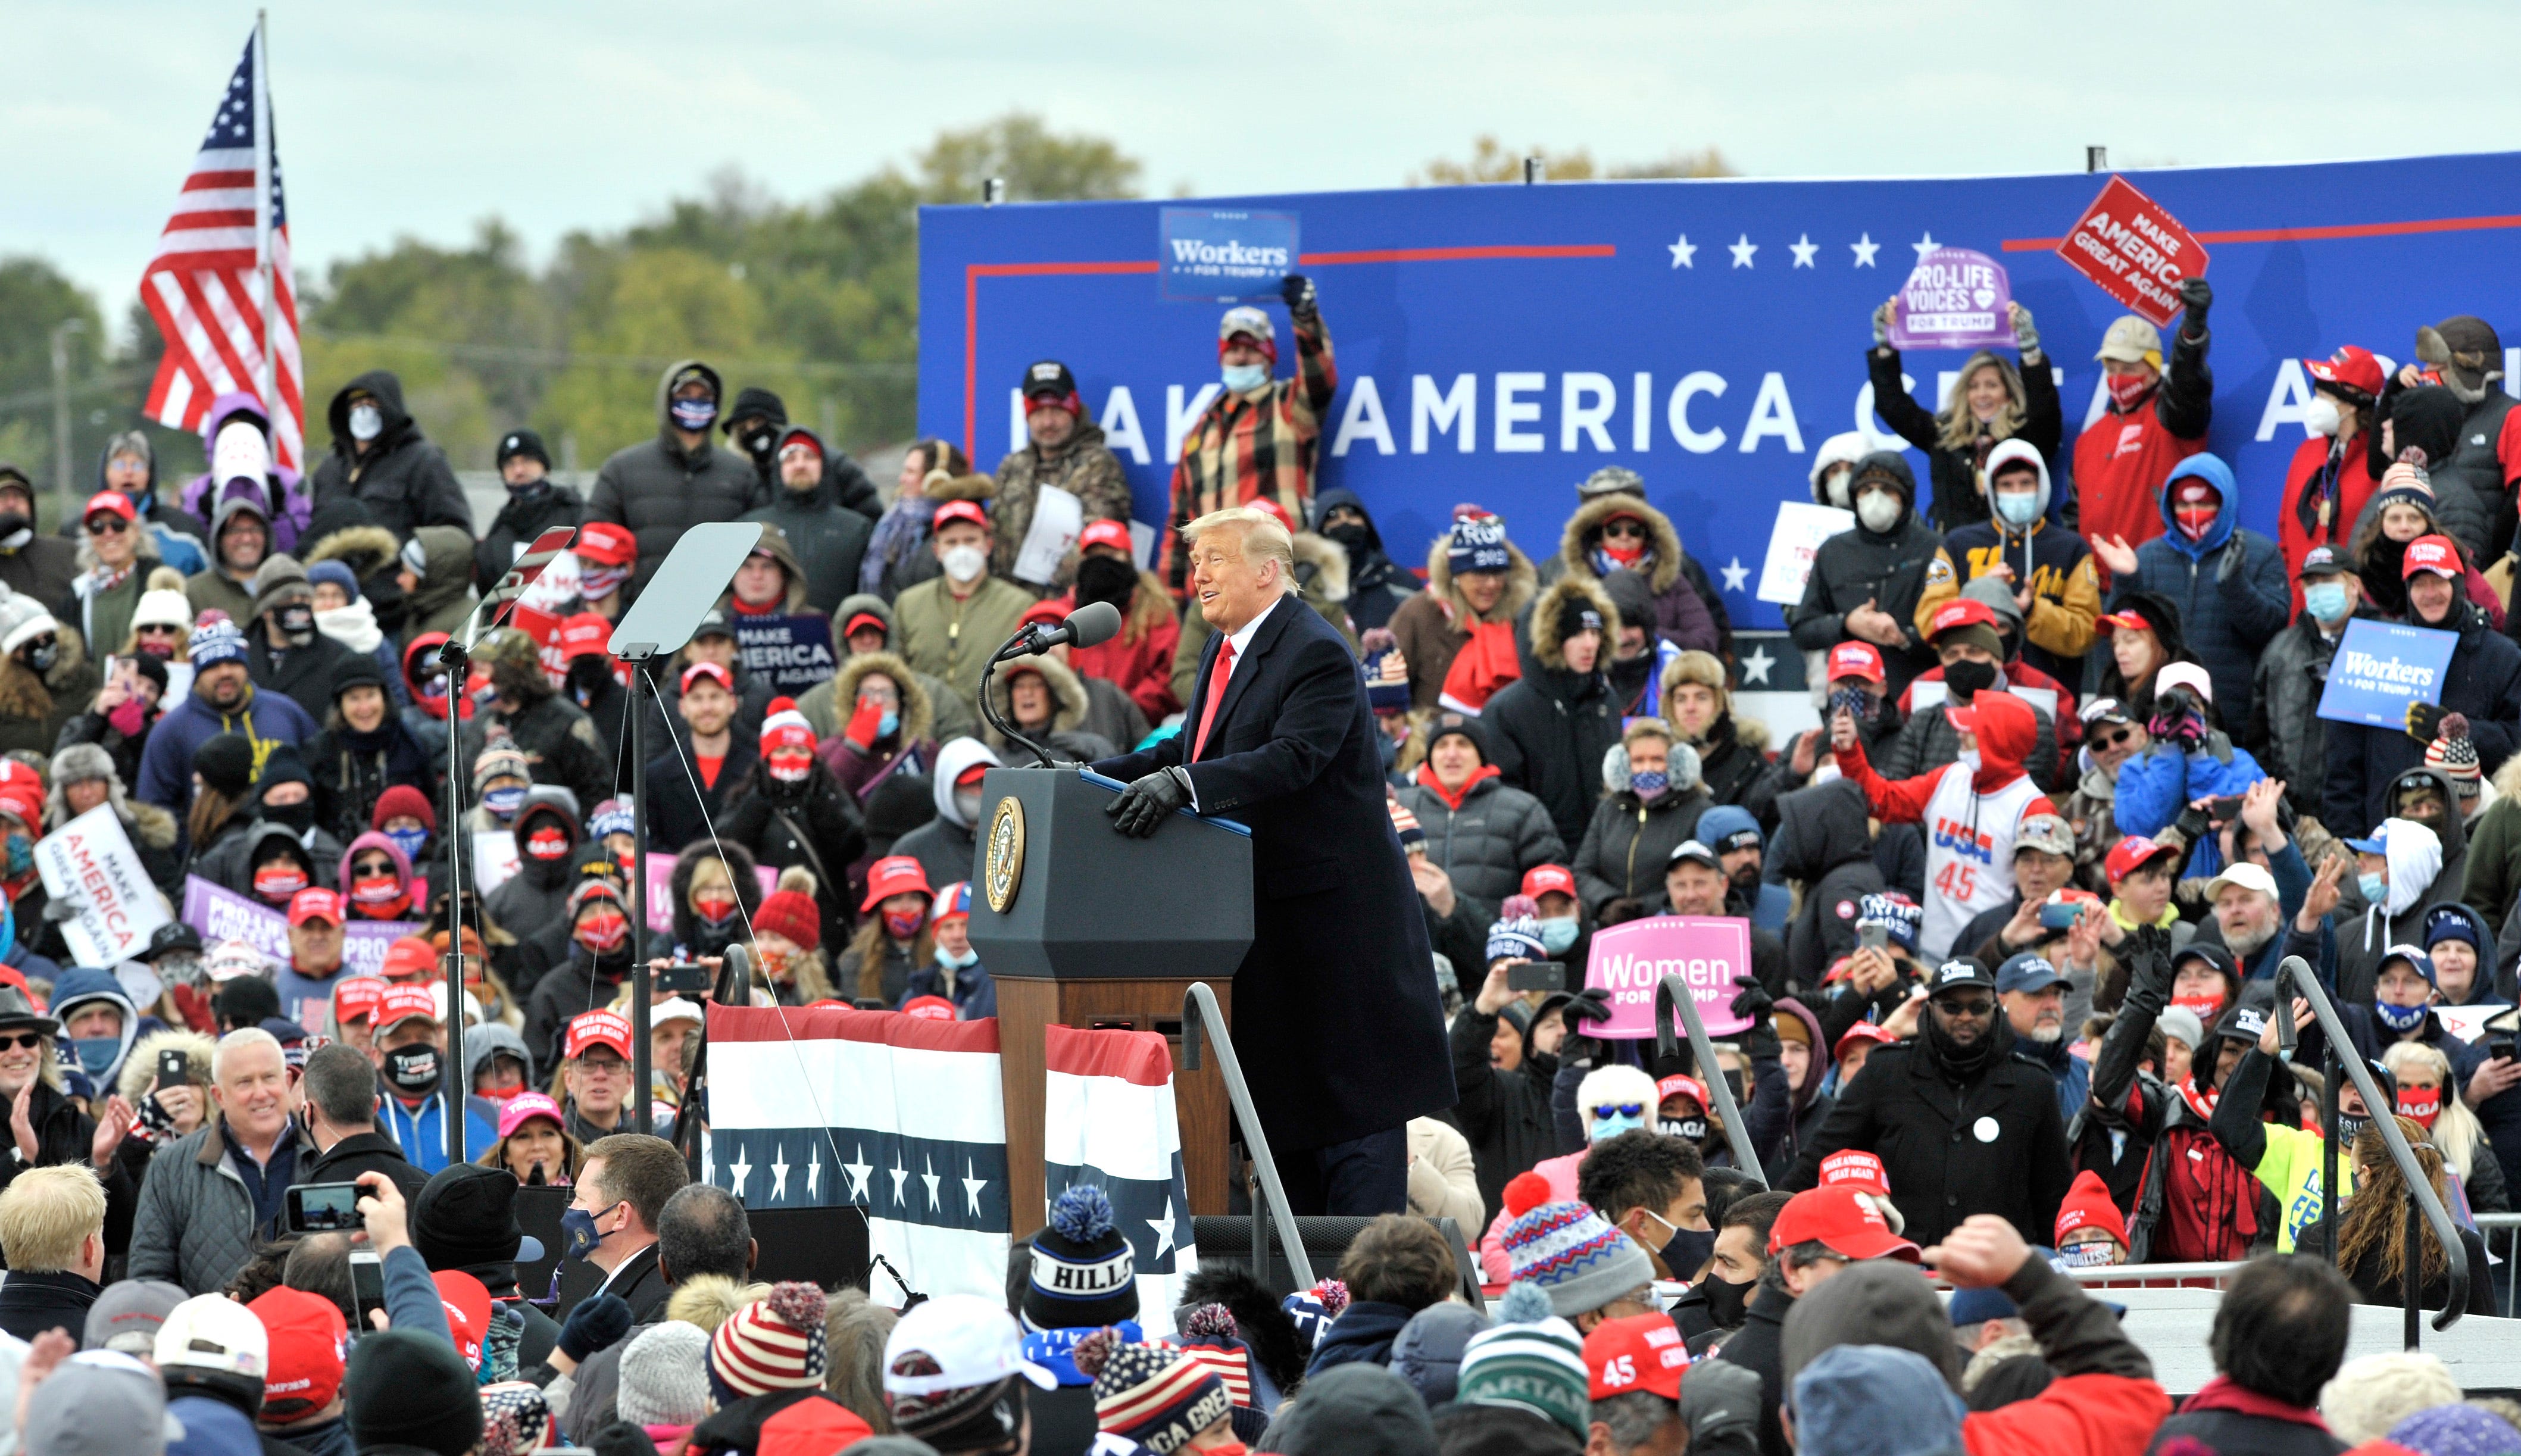 U.S. President Donald Trump addresses supporters at the Oakland International Airport in Waterford Twp., Friday, October 30, 2020, for his Make America Great Again Victory Rally.